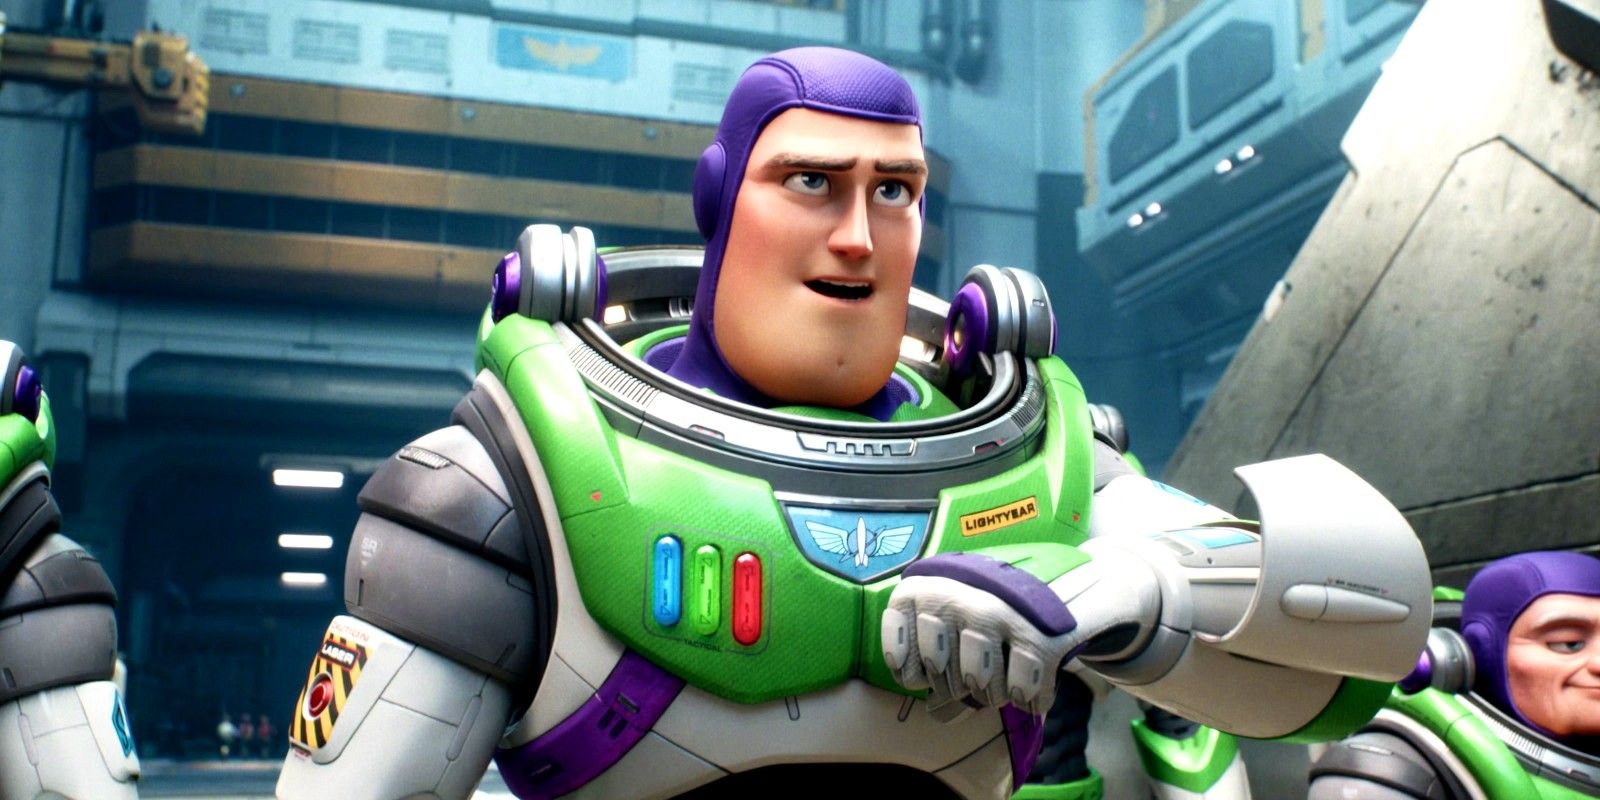 life-size-buzz-lightyear-suit-brings-pixar-hero-to-life-in-epic-toy-story-cosplay-video